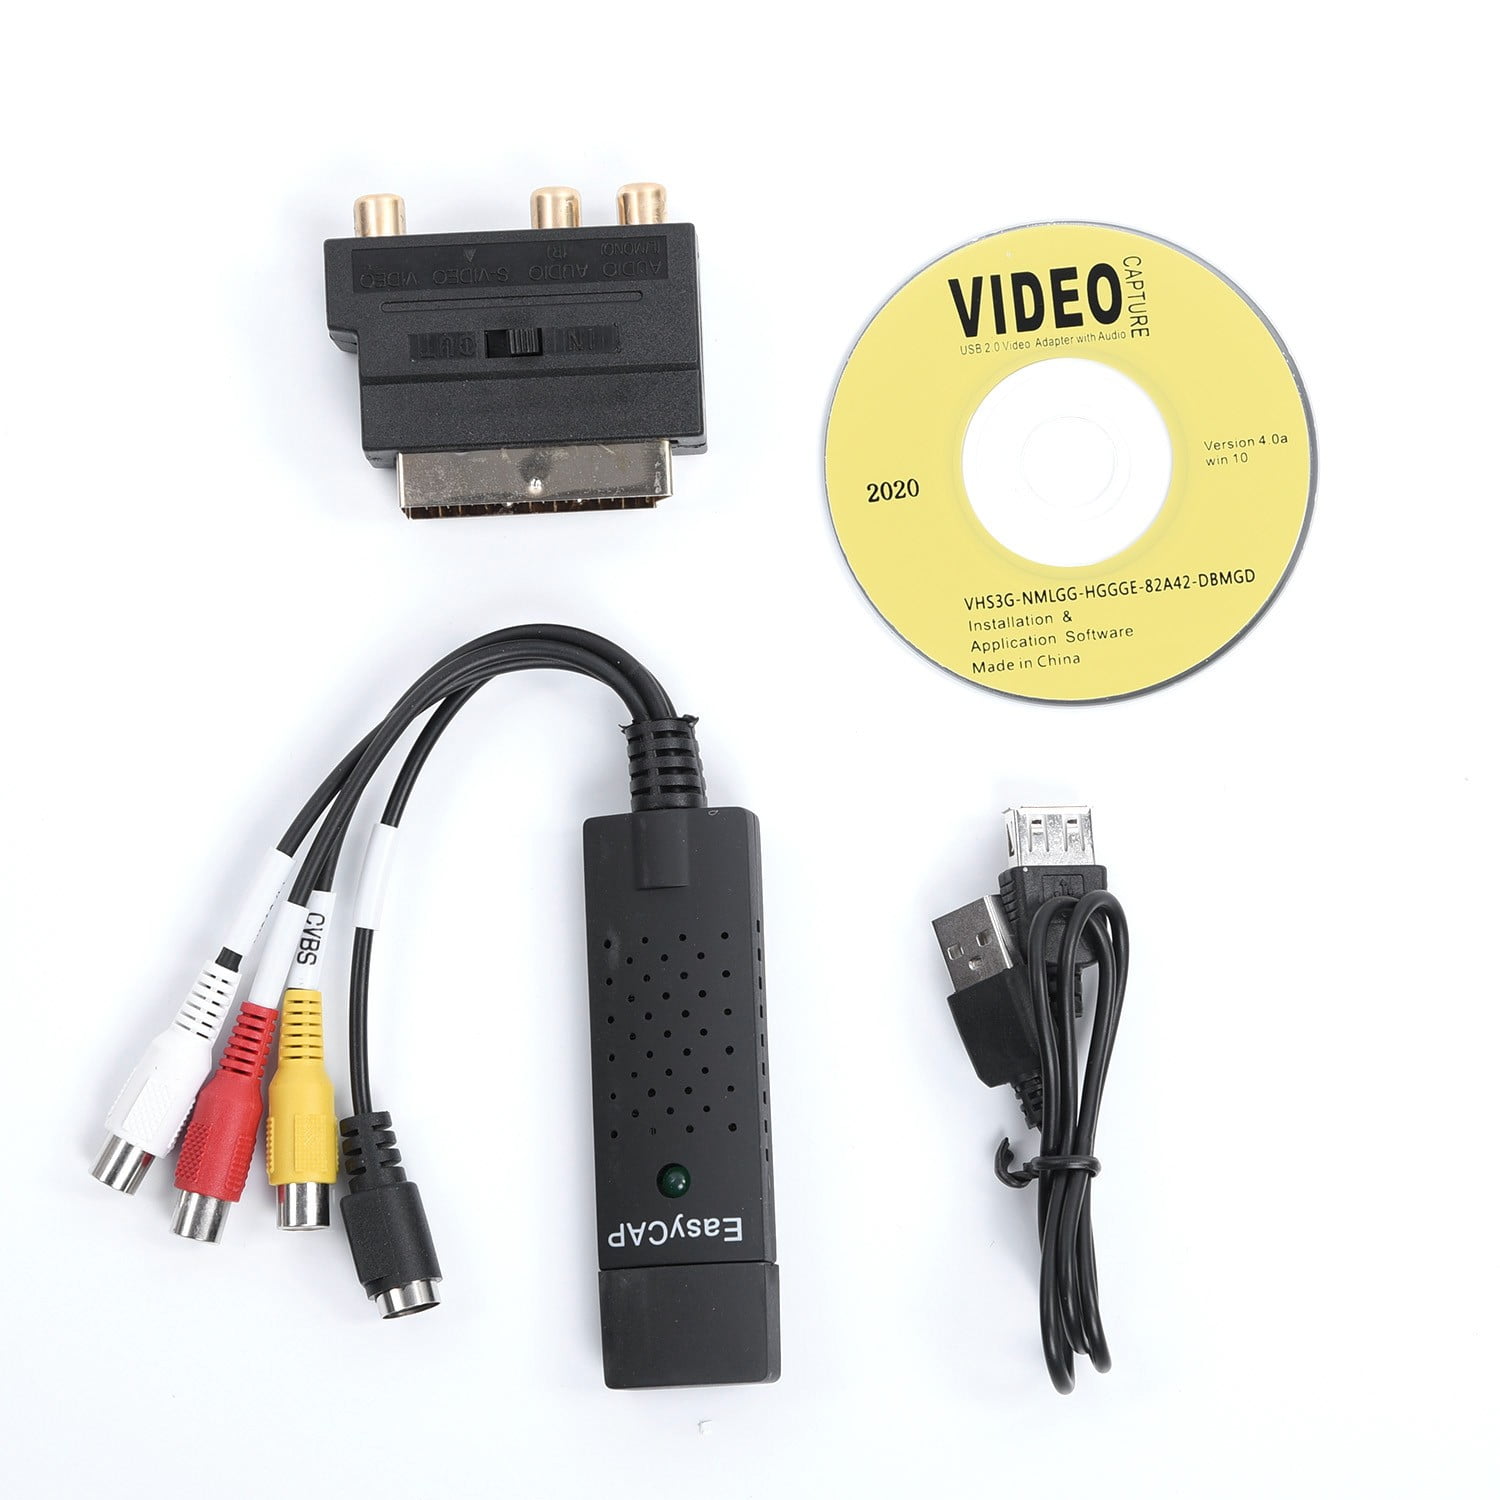 In the name Personification Rodeo USB VHS To DVD Audio Video Converter Capture Full Scart And Leads Cable Set  - Walmart.com